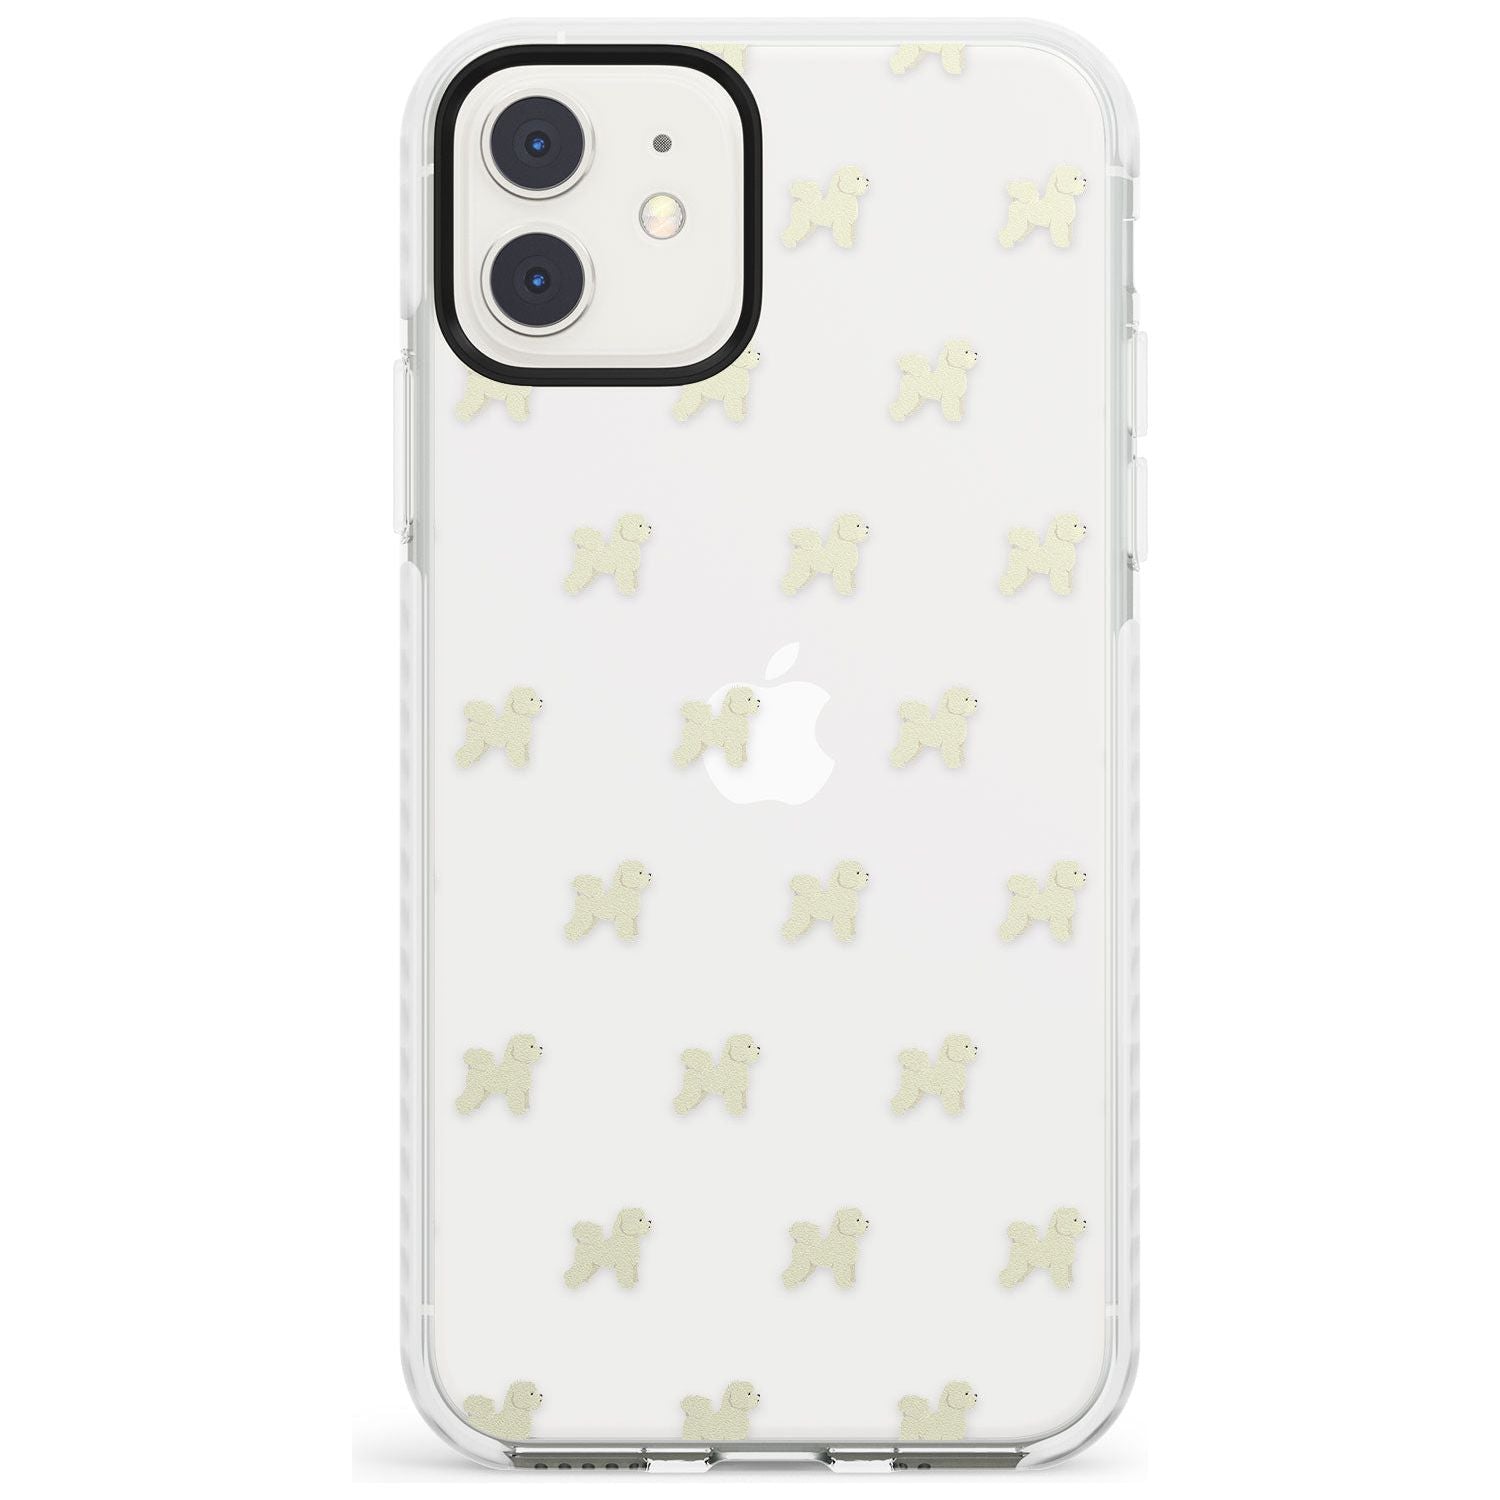 Bichon Frise Dog Pattern Clear Impact Phone Case for iPhone 11